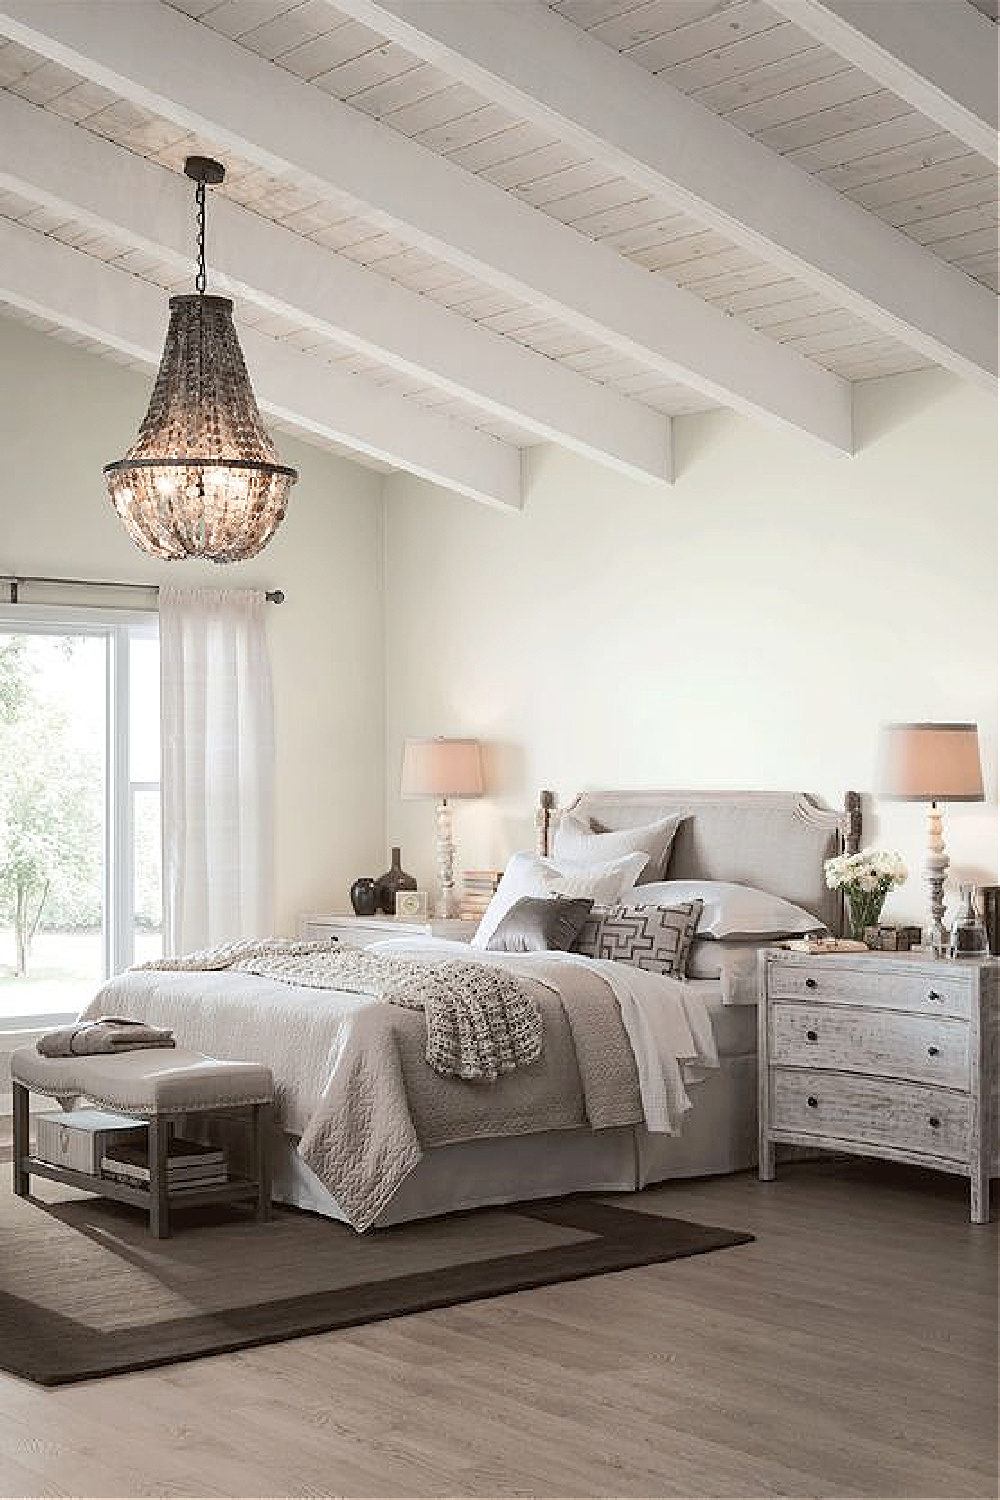 Wall paint color: SHERWIN WILLIAMS Alabaster. Photo: Sherwin Williams. Come Tour 16 Soothing Paint Colors for a Tranquil Bedroom Retreat!